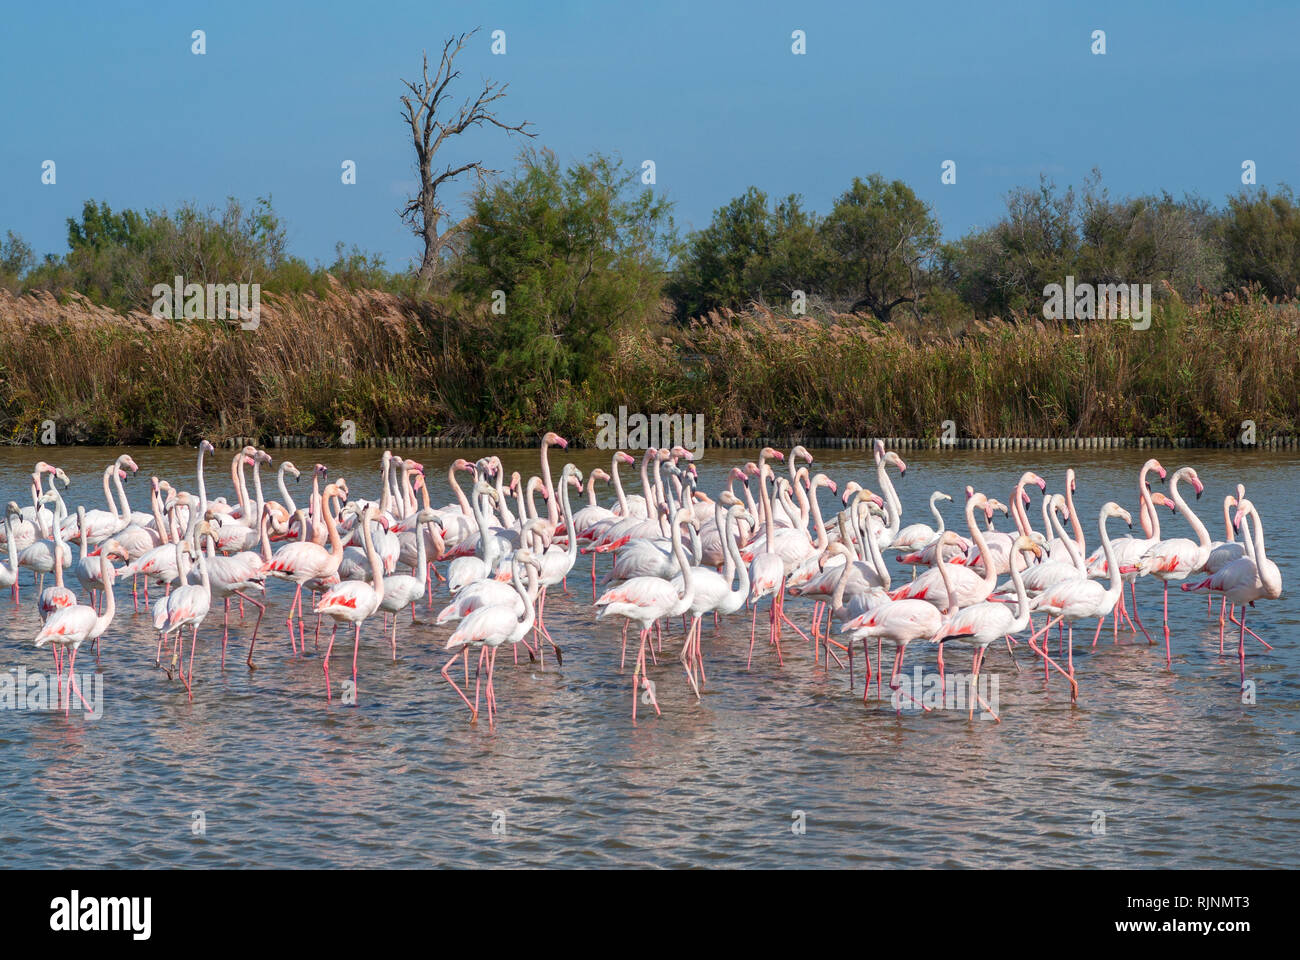 of Flamingos in Regional Nature Park, France Stock Photo - Alamy